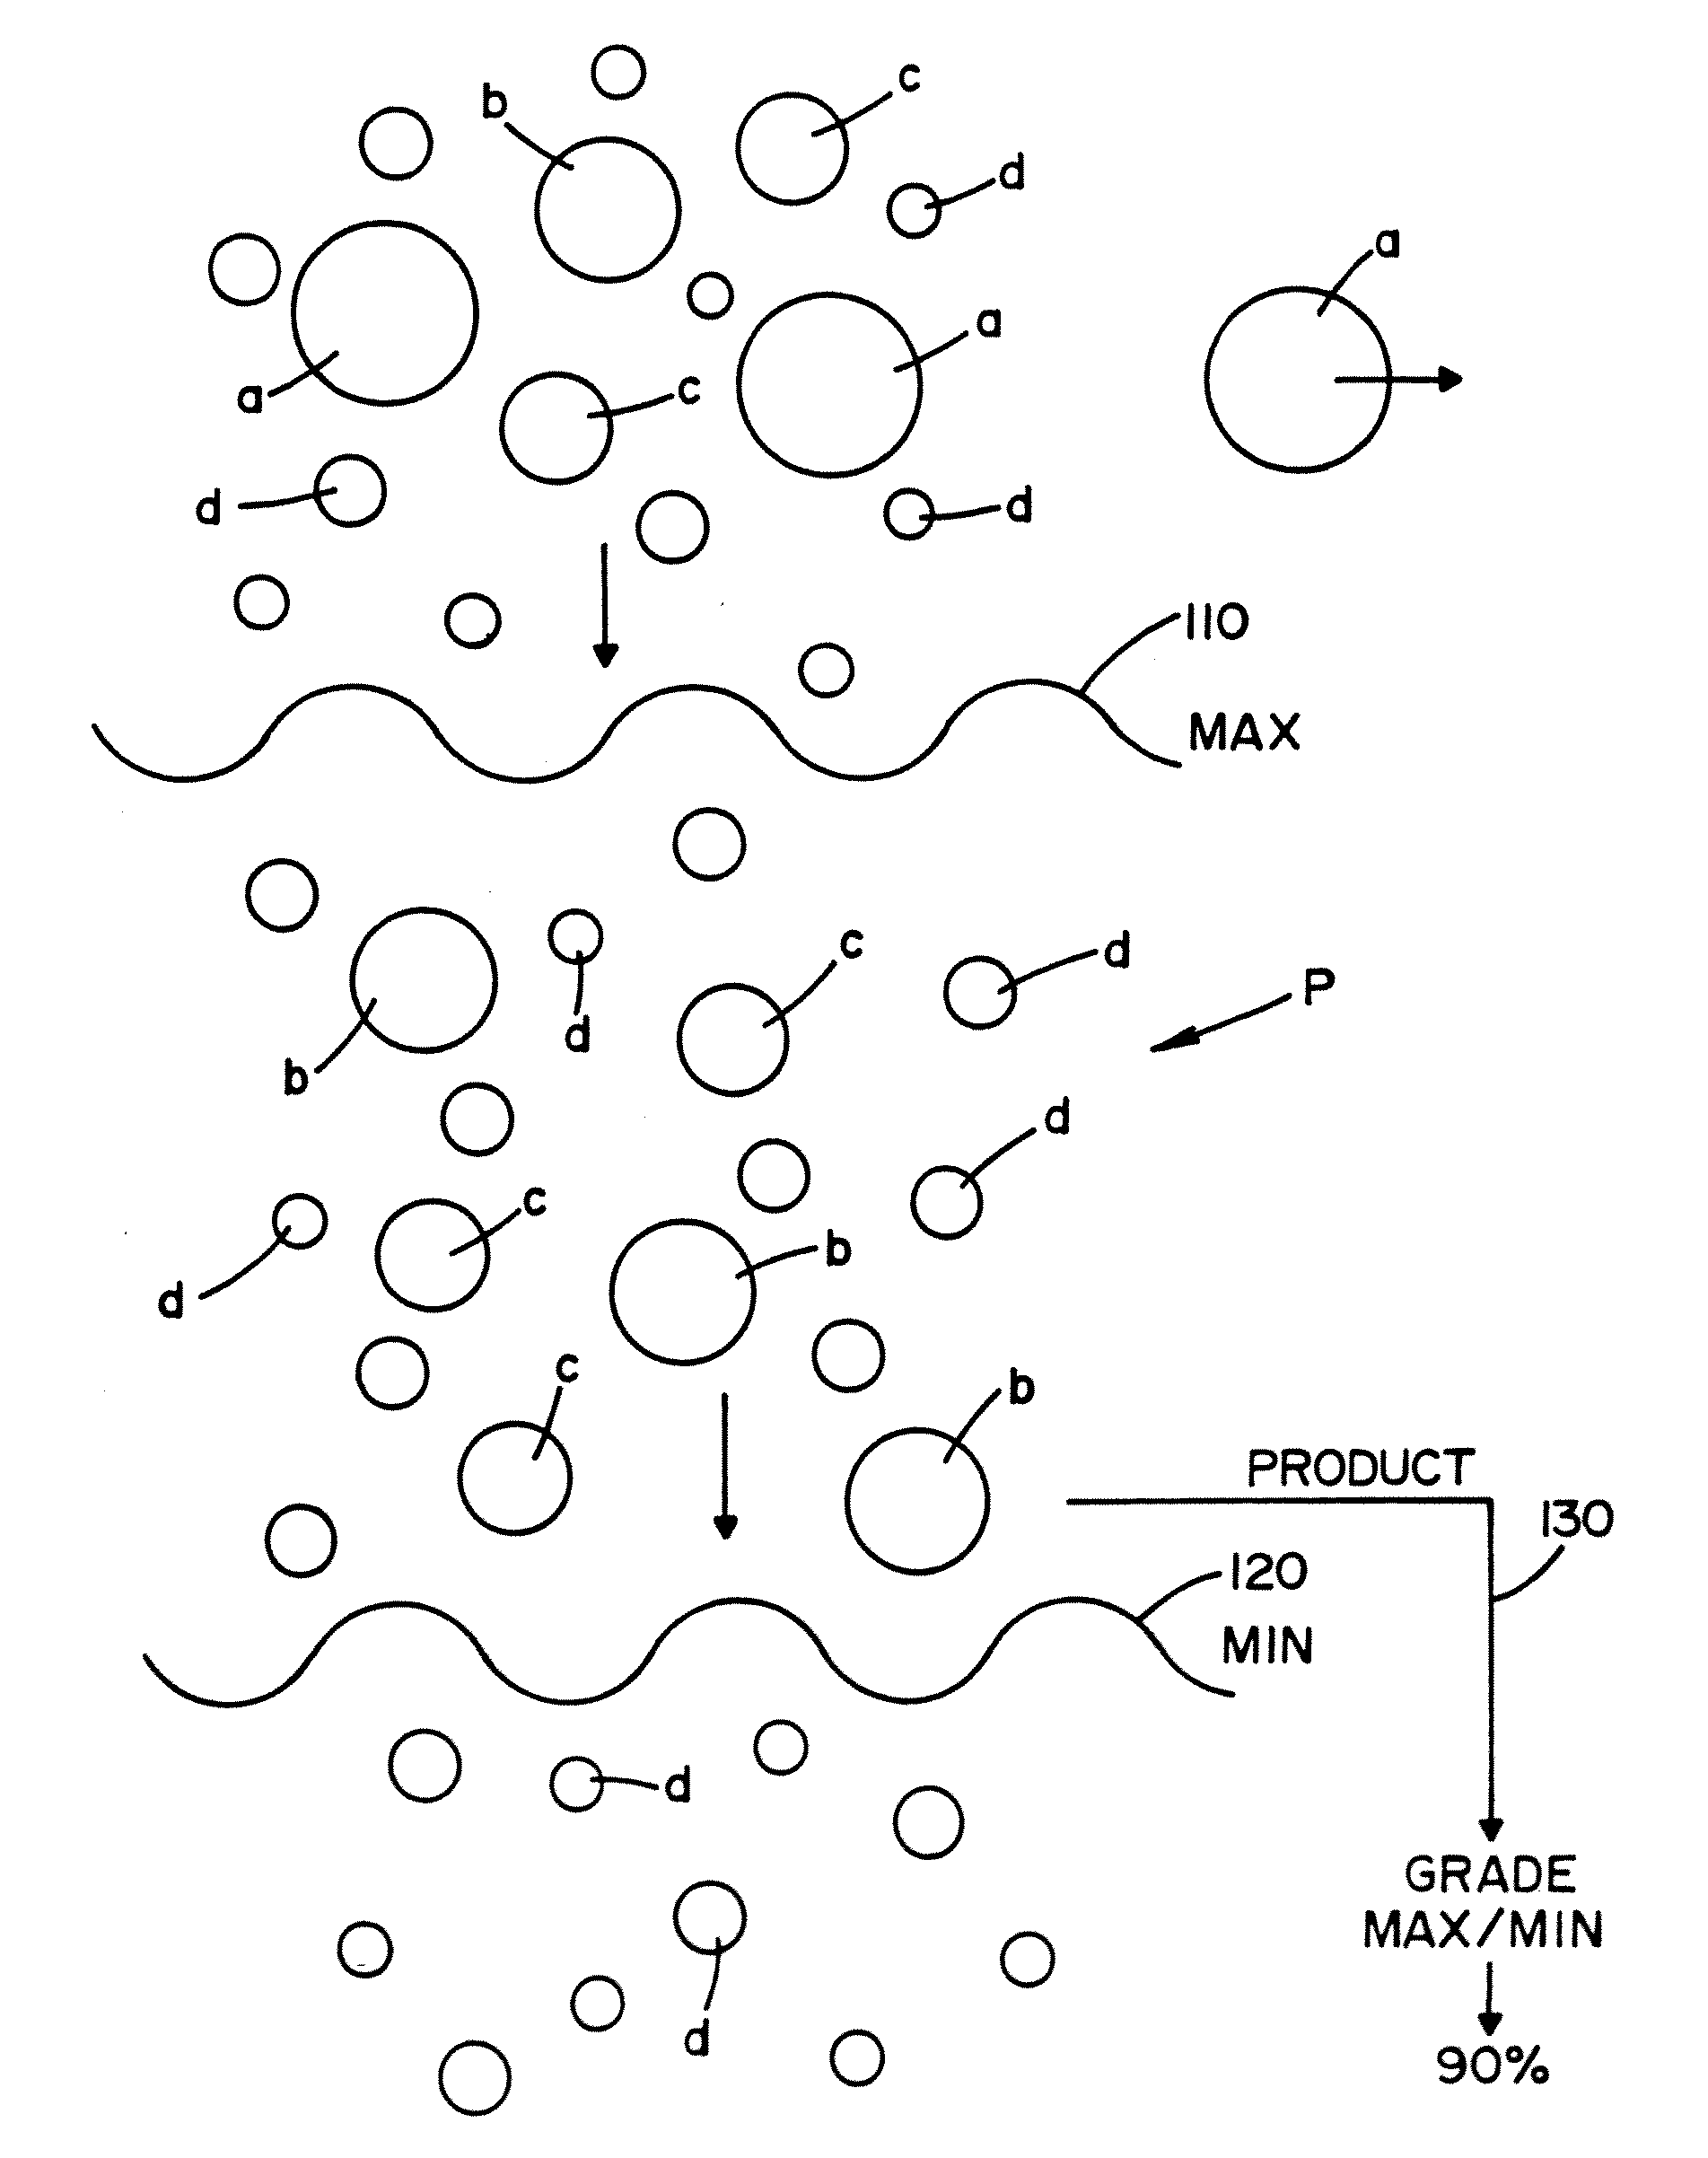 Method of making proppants used in gas or oil extraction